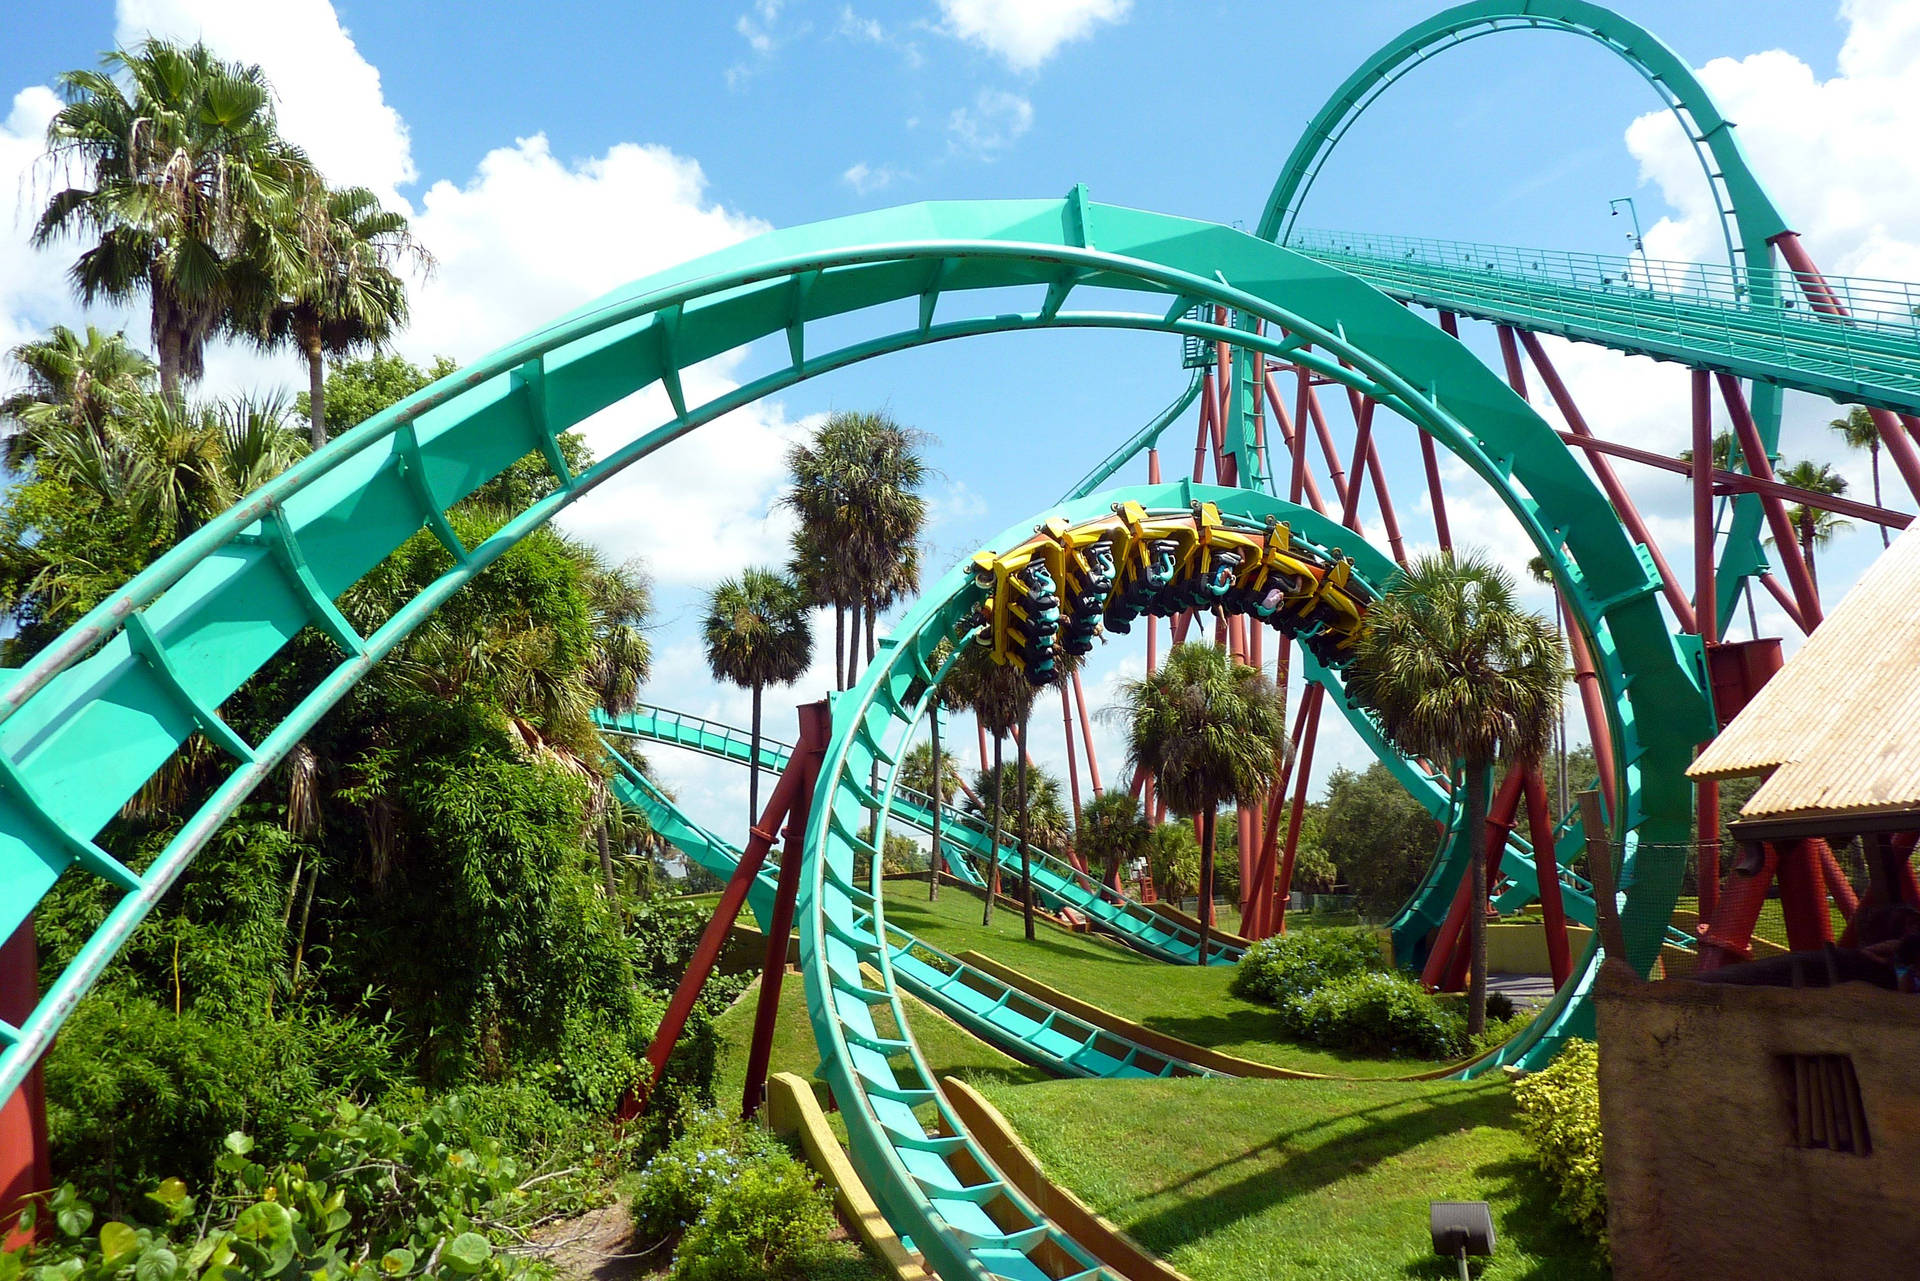 Exciting ride on a teal-colored roller coaster Wallpaper